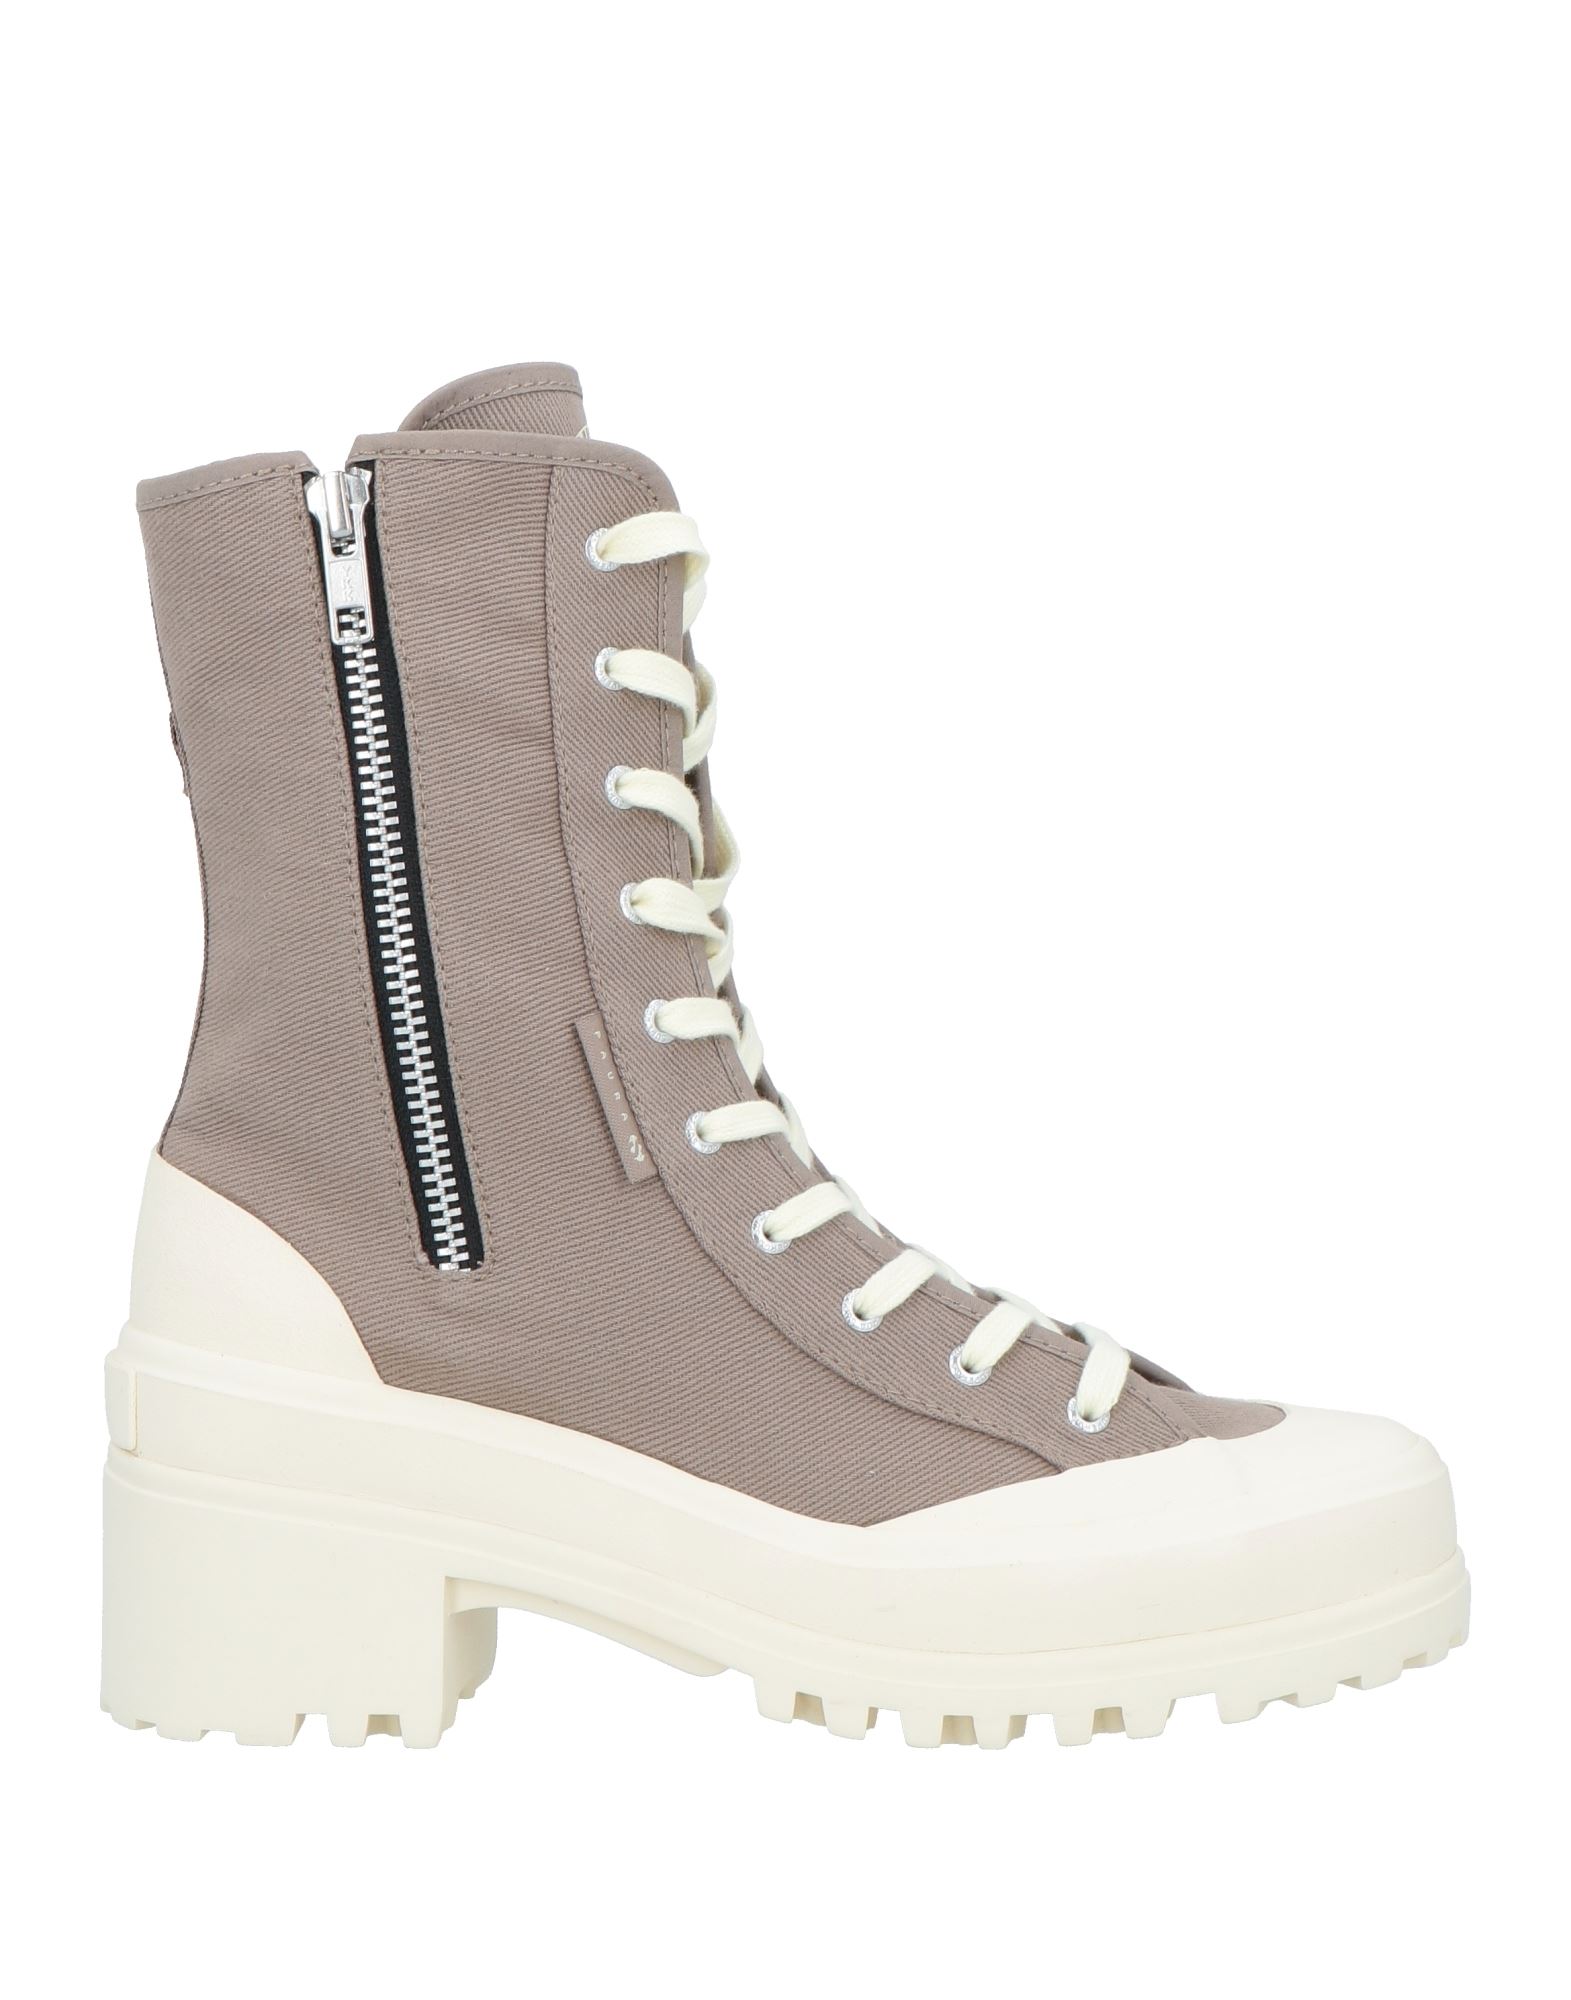 Paura X Superga Ankle Boots In Beige